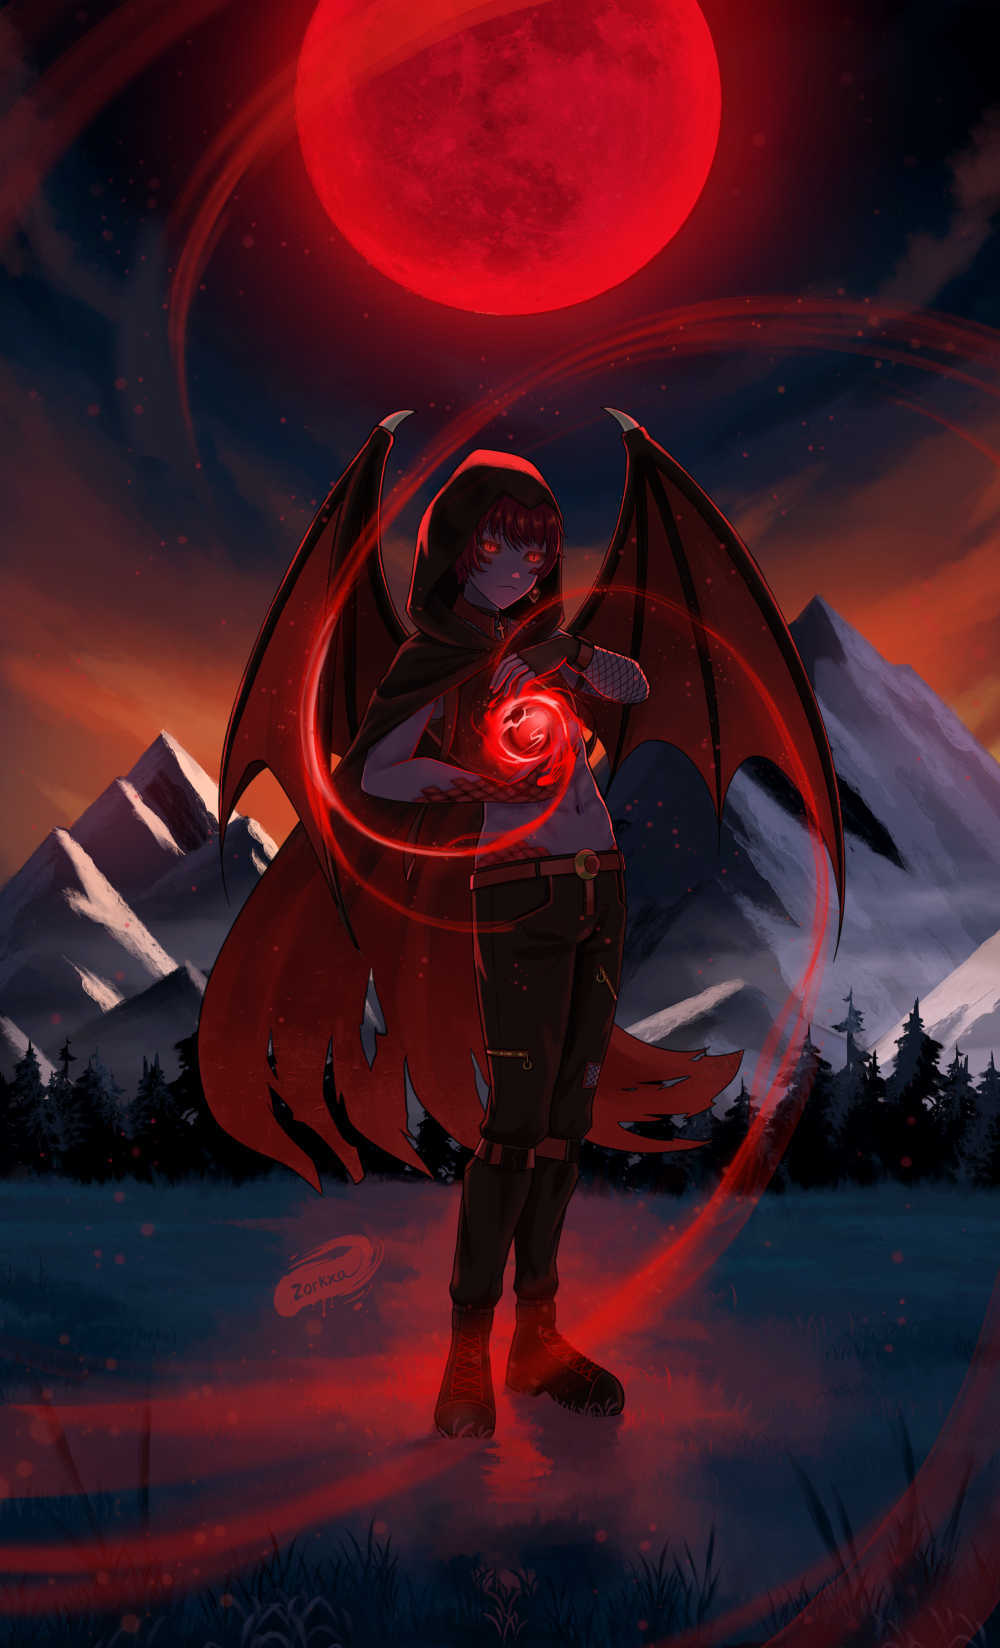 Power of the Blood Moon